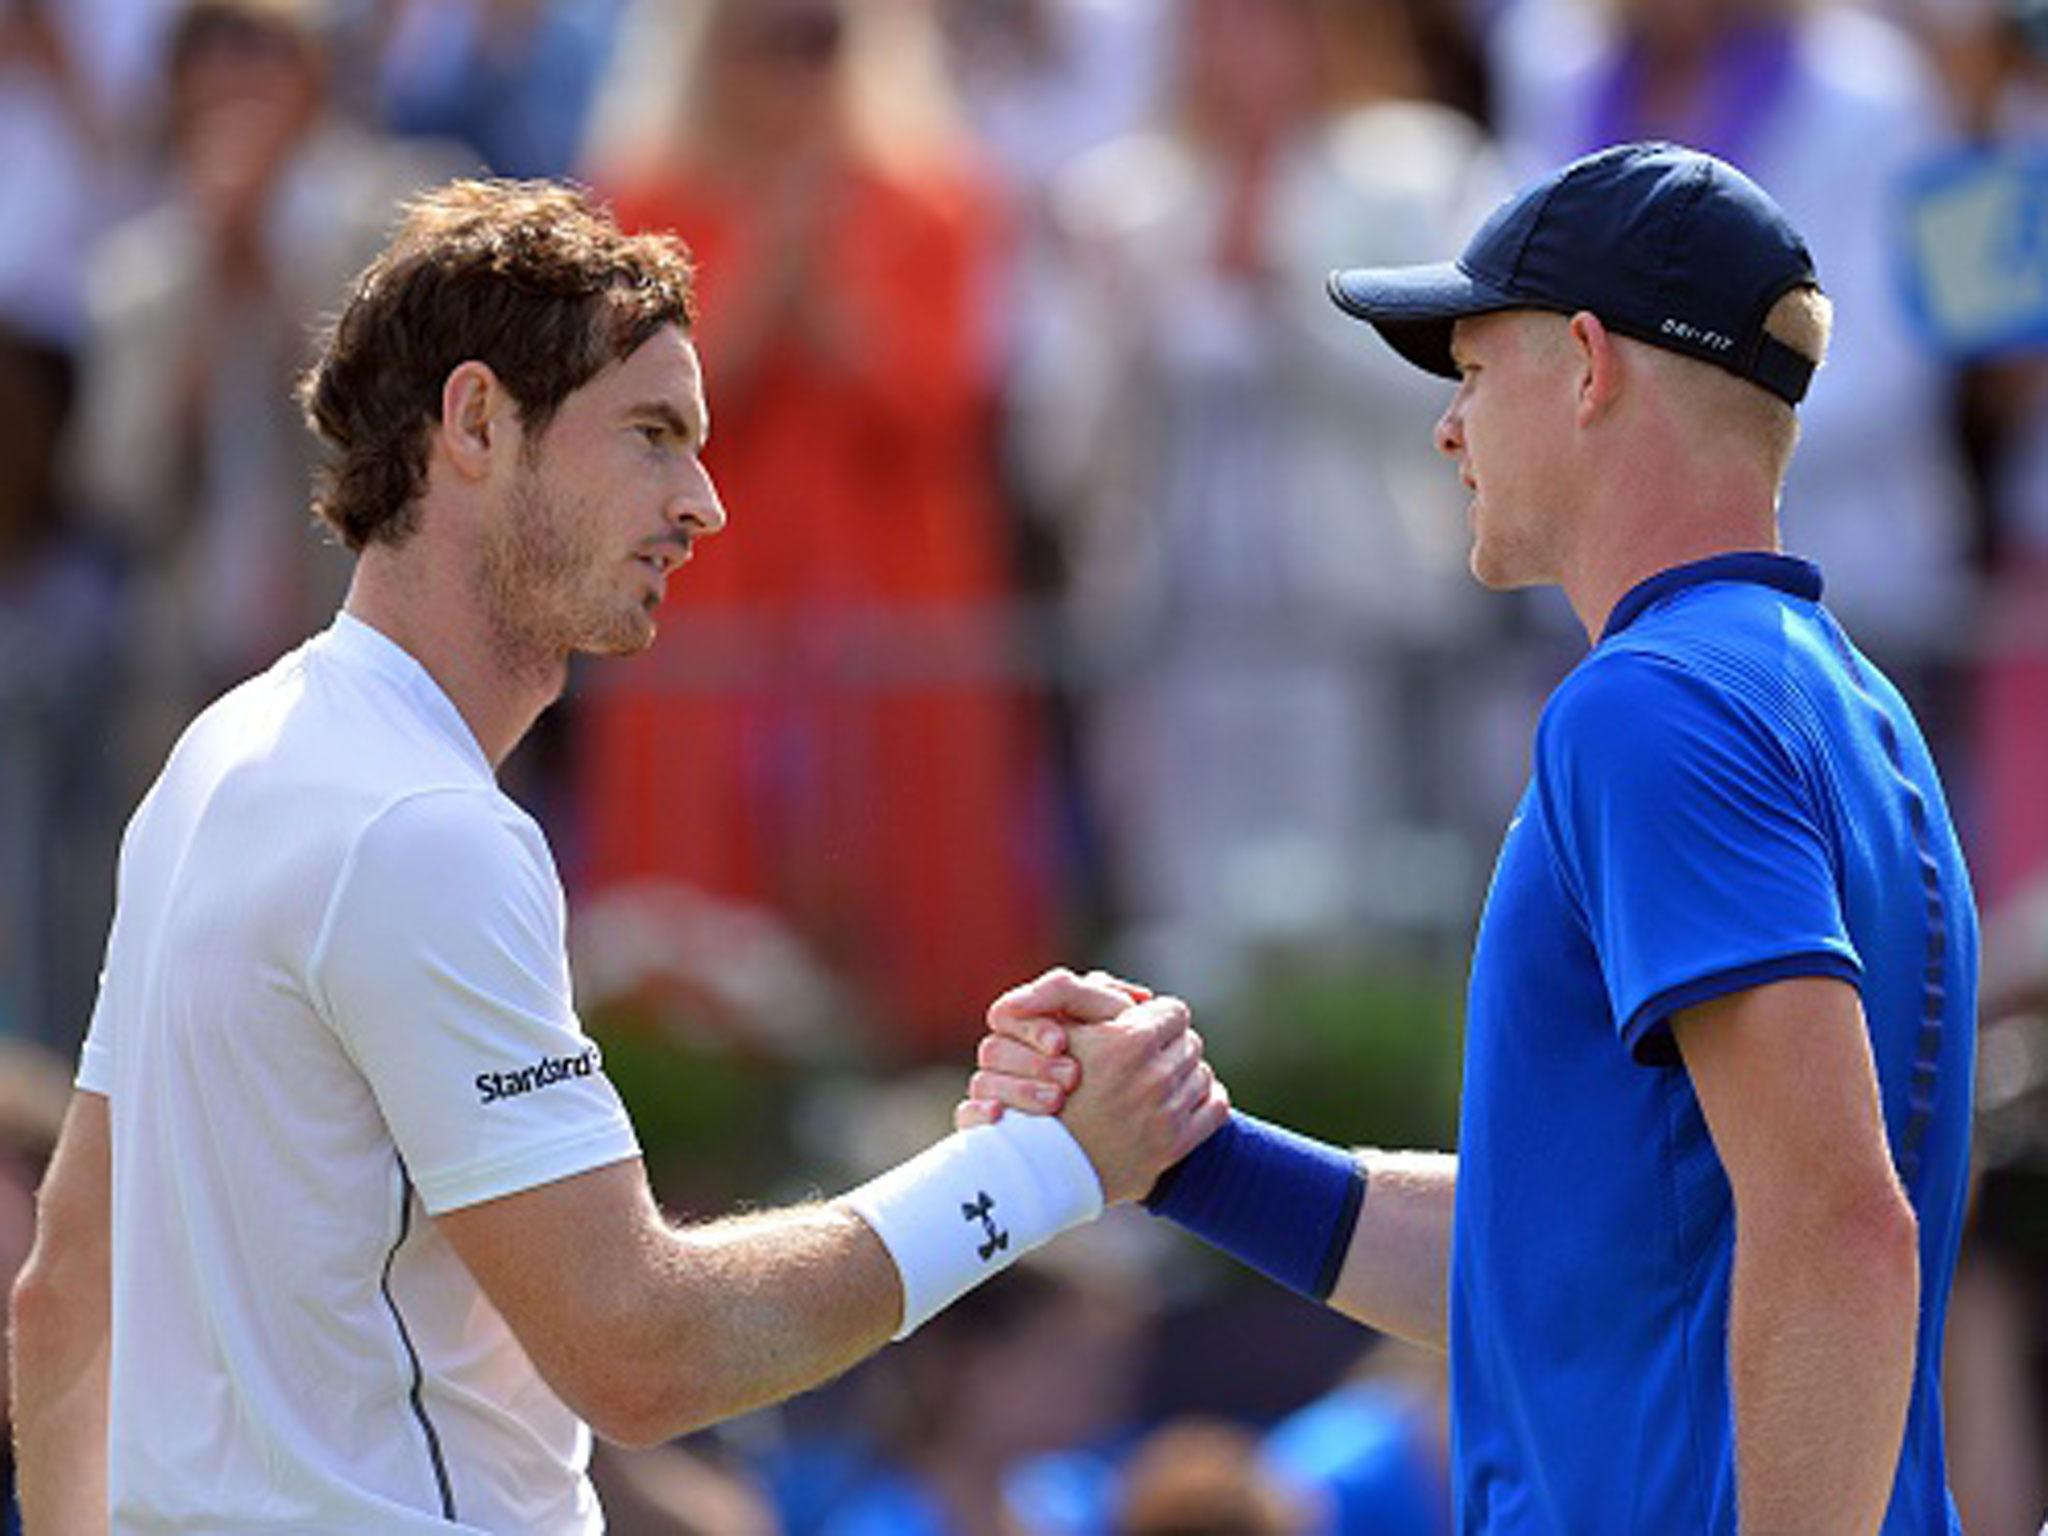 Andy Murray commiserates with Kyle Edmund after their meeting in London on Friday (Getty)